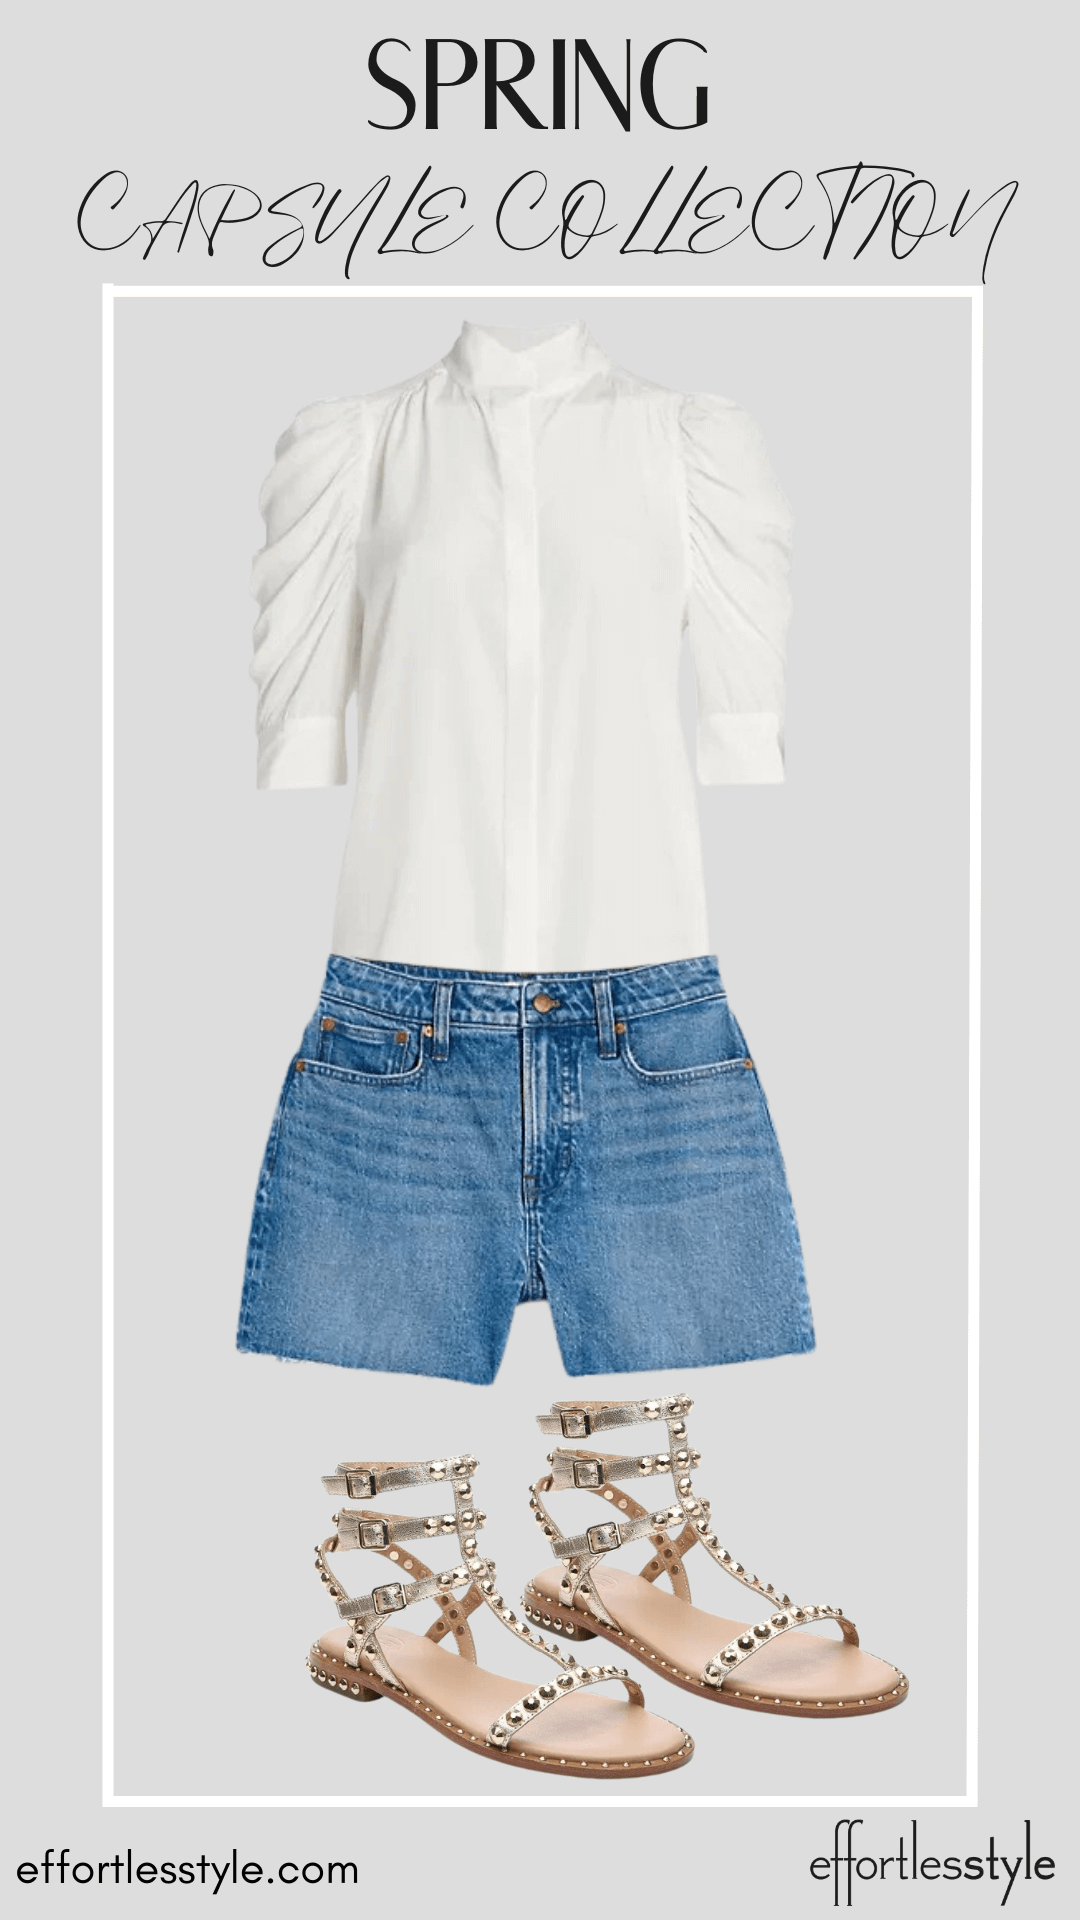 How To Wear Our Spring Capsule Wardrobe - Part 1 Short Sleeve Blouse & Denim Shorts must have blouse for spring Nashville area stylists share favorite dressy blouse for spring clothing worth investing in when the invest in your wardrobe how to create a capsule wardrobe